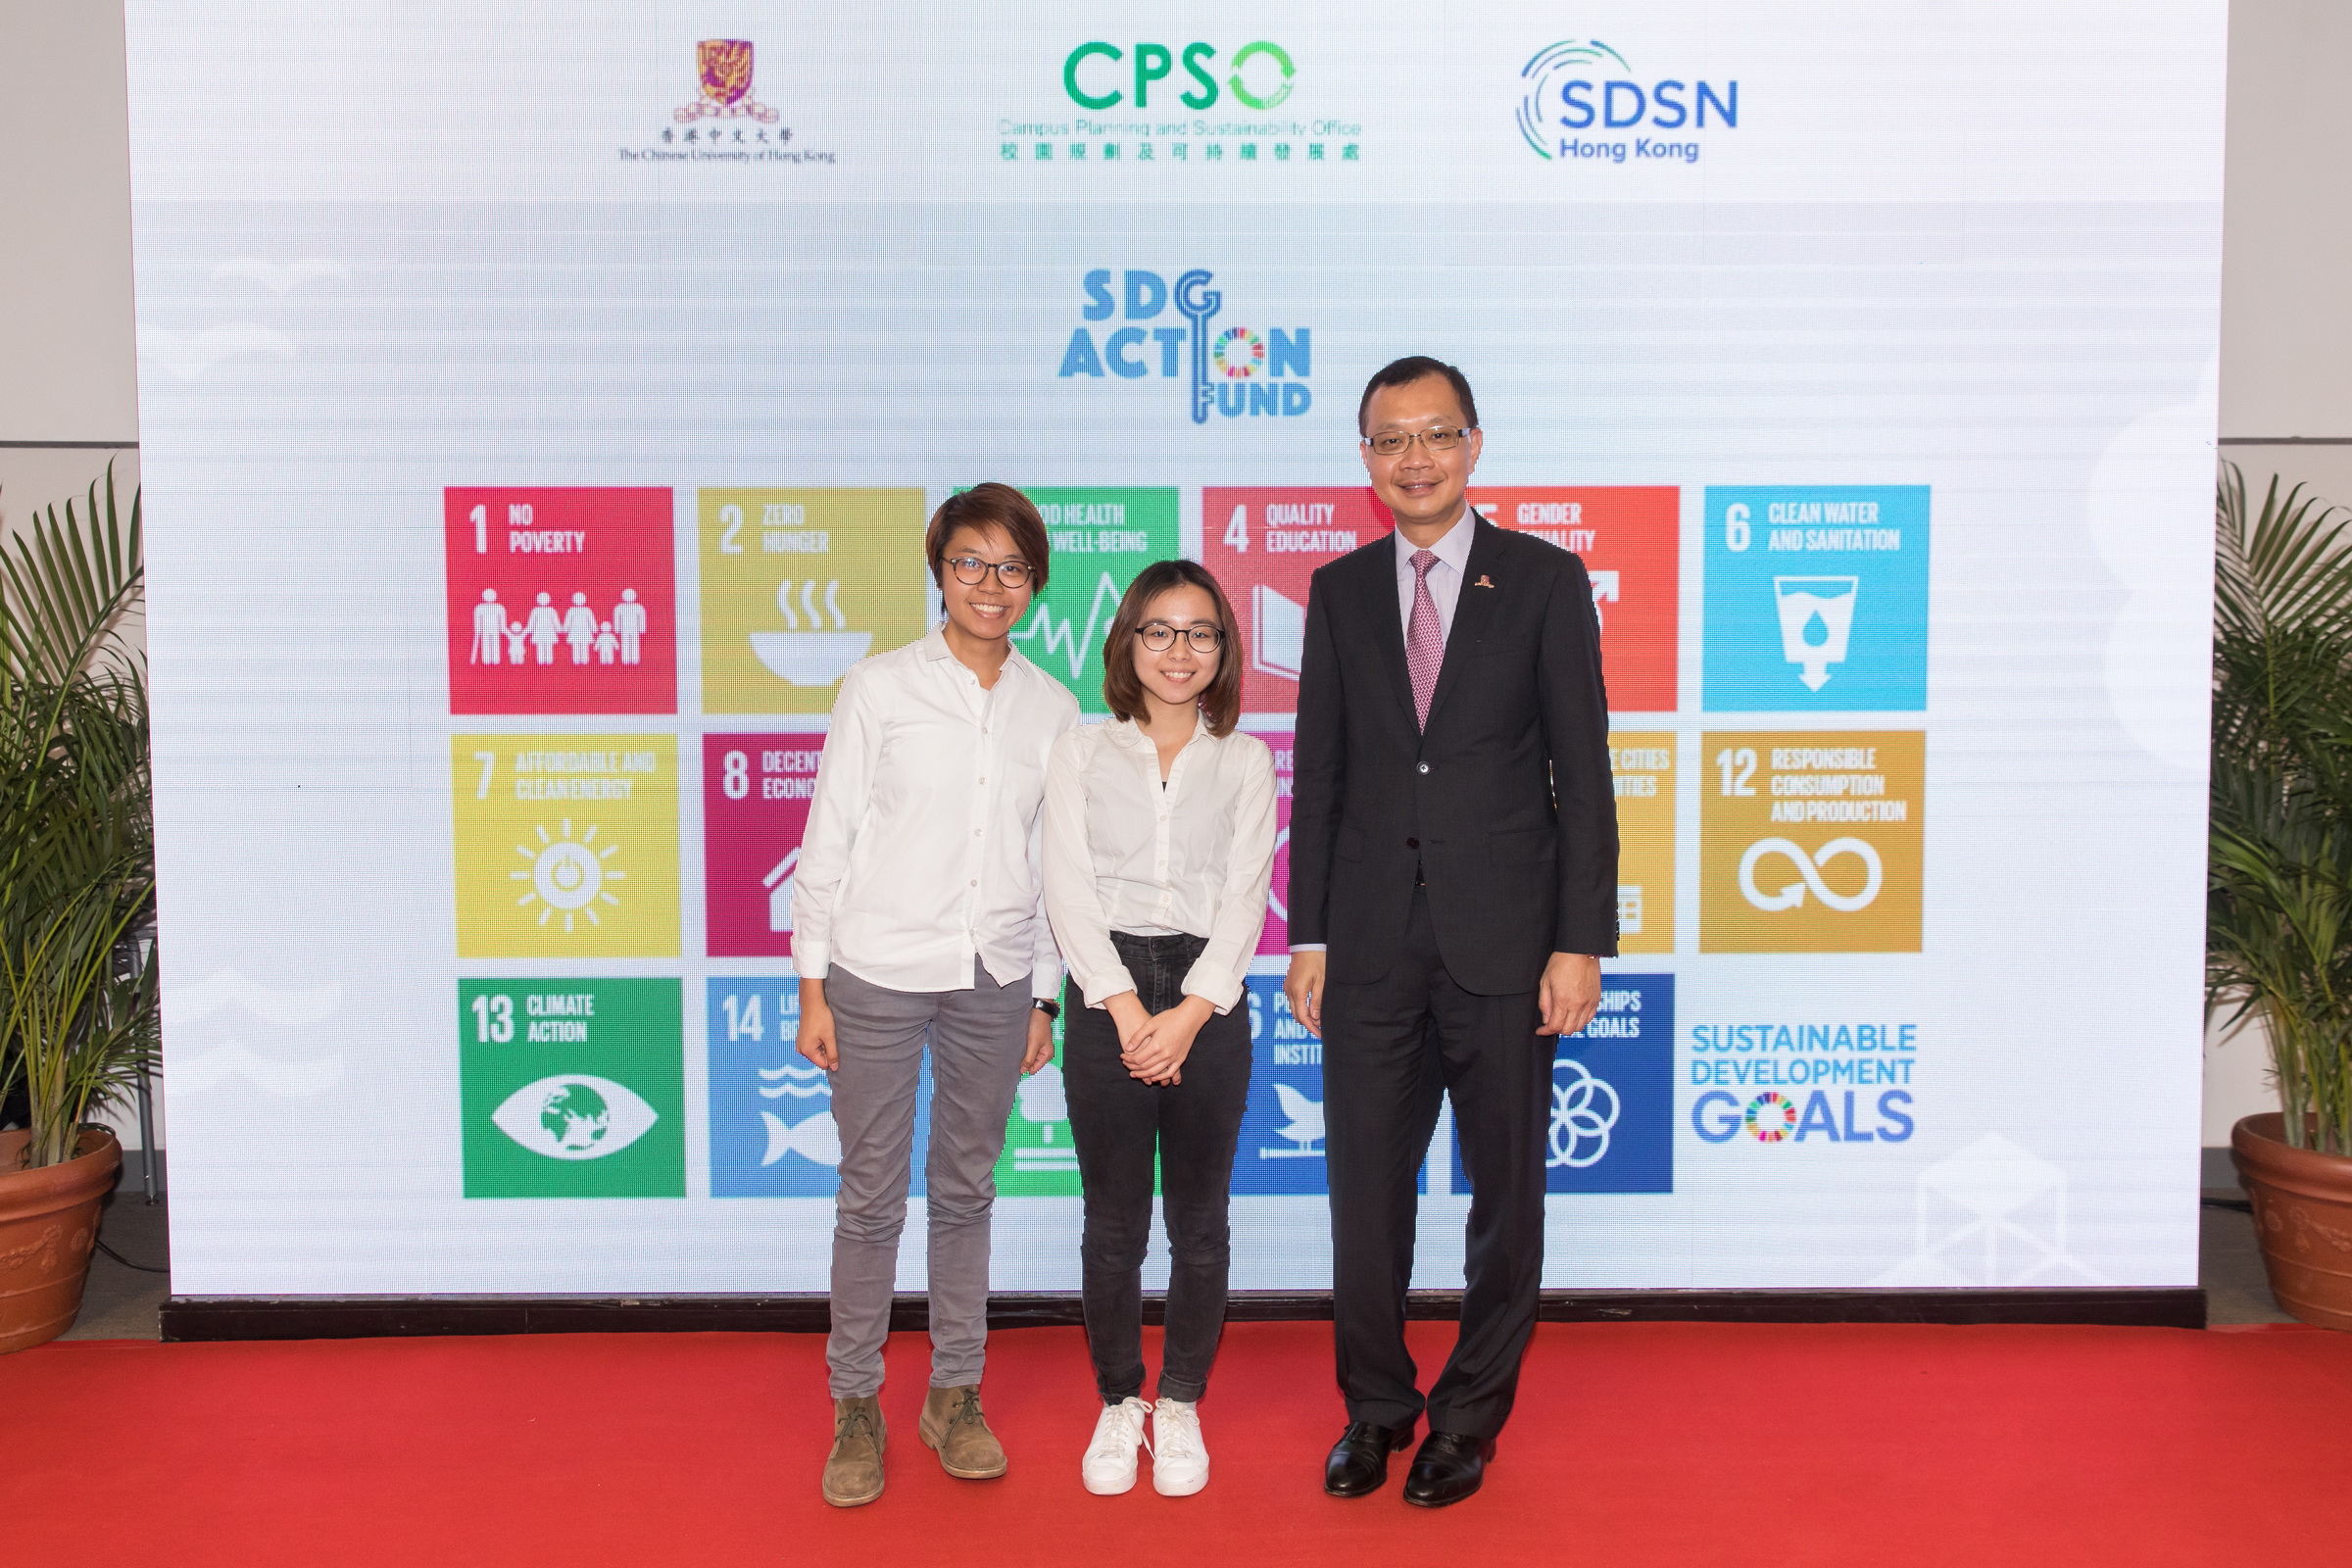 Mr Eric S.P. Ng, Vice-President and Chairman of the Committee on Campus Sustainability of CUHK (right) and the student representatives of one of the pilot projects supported by the SDG Action Fund